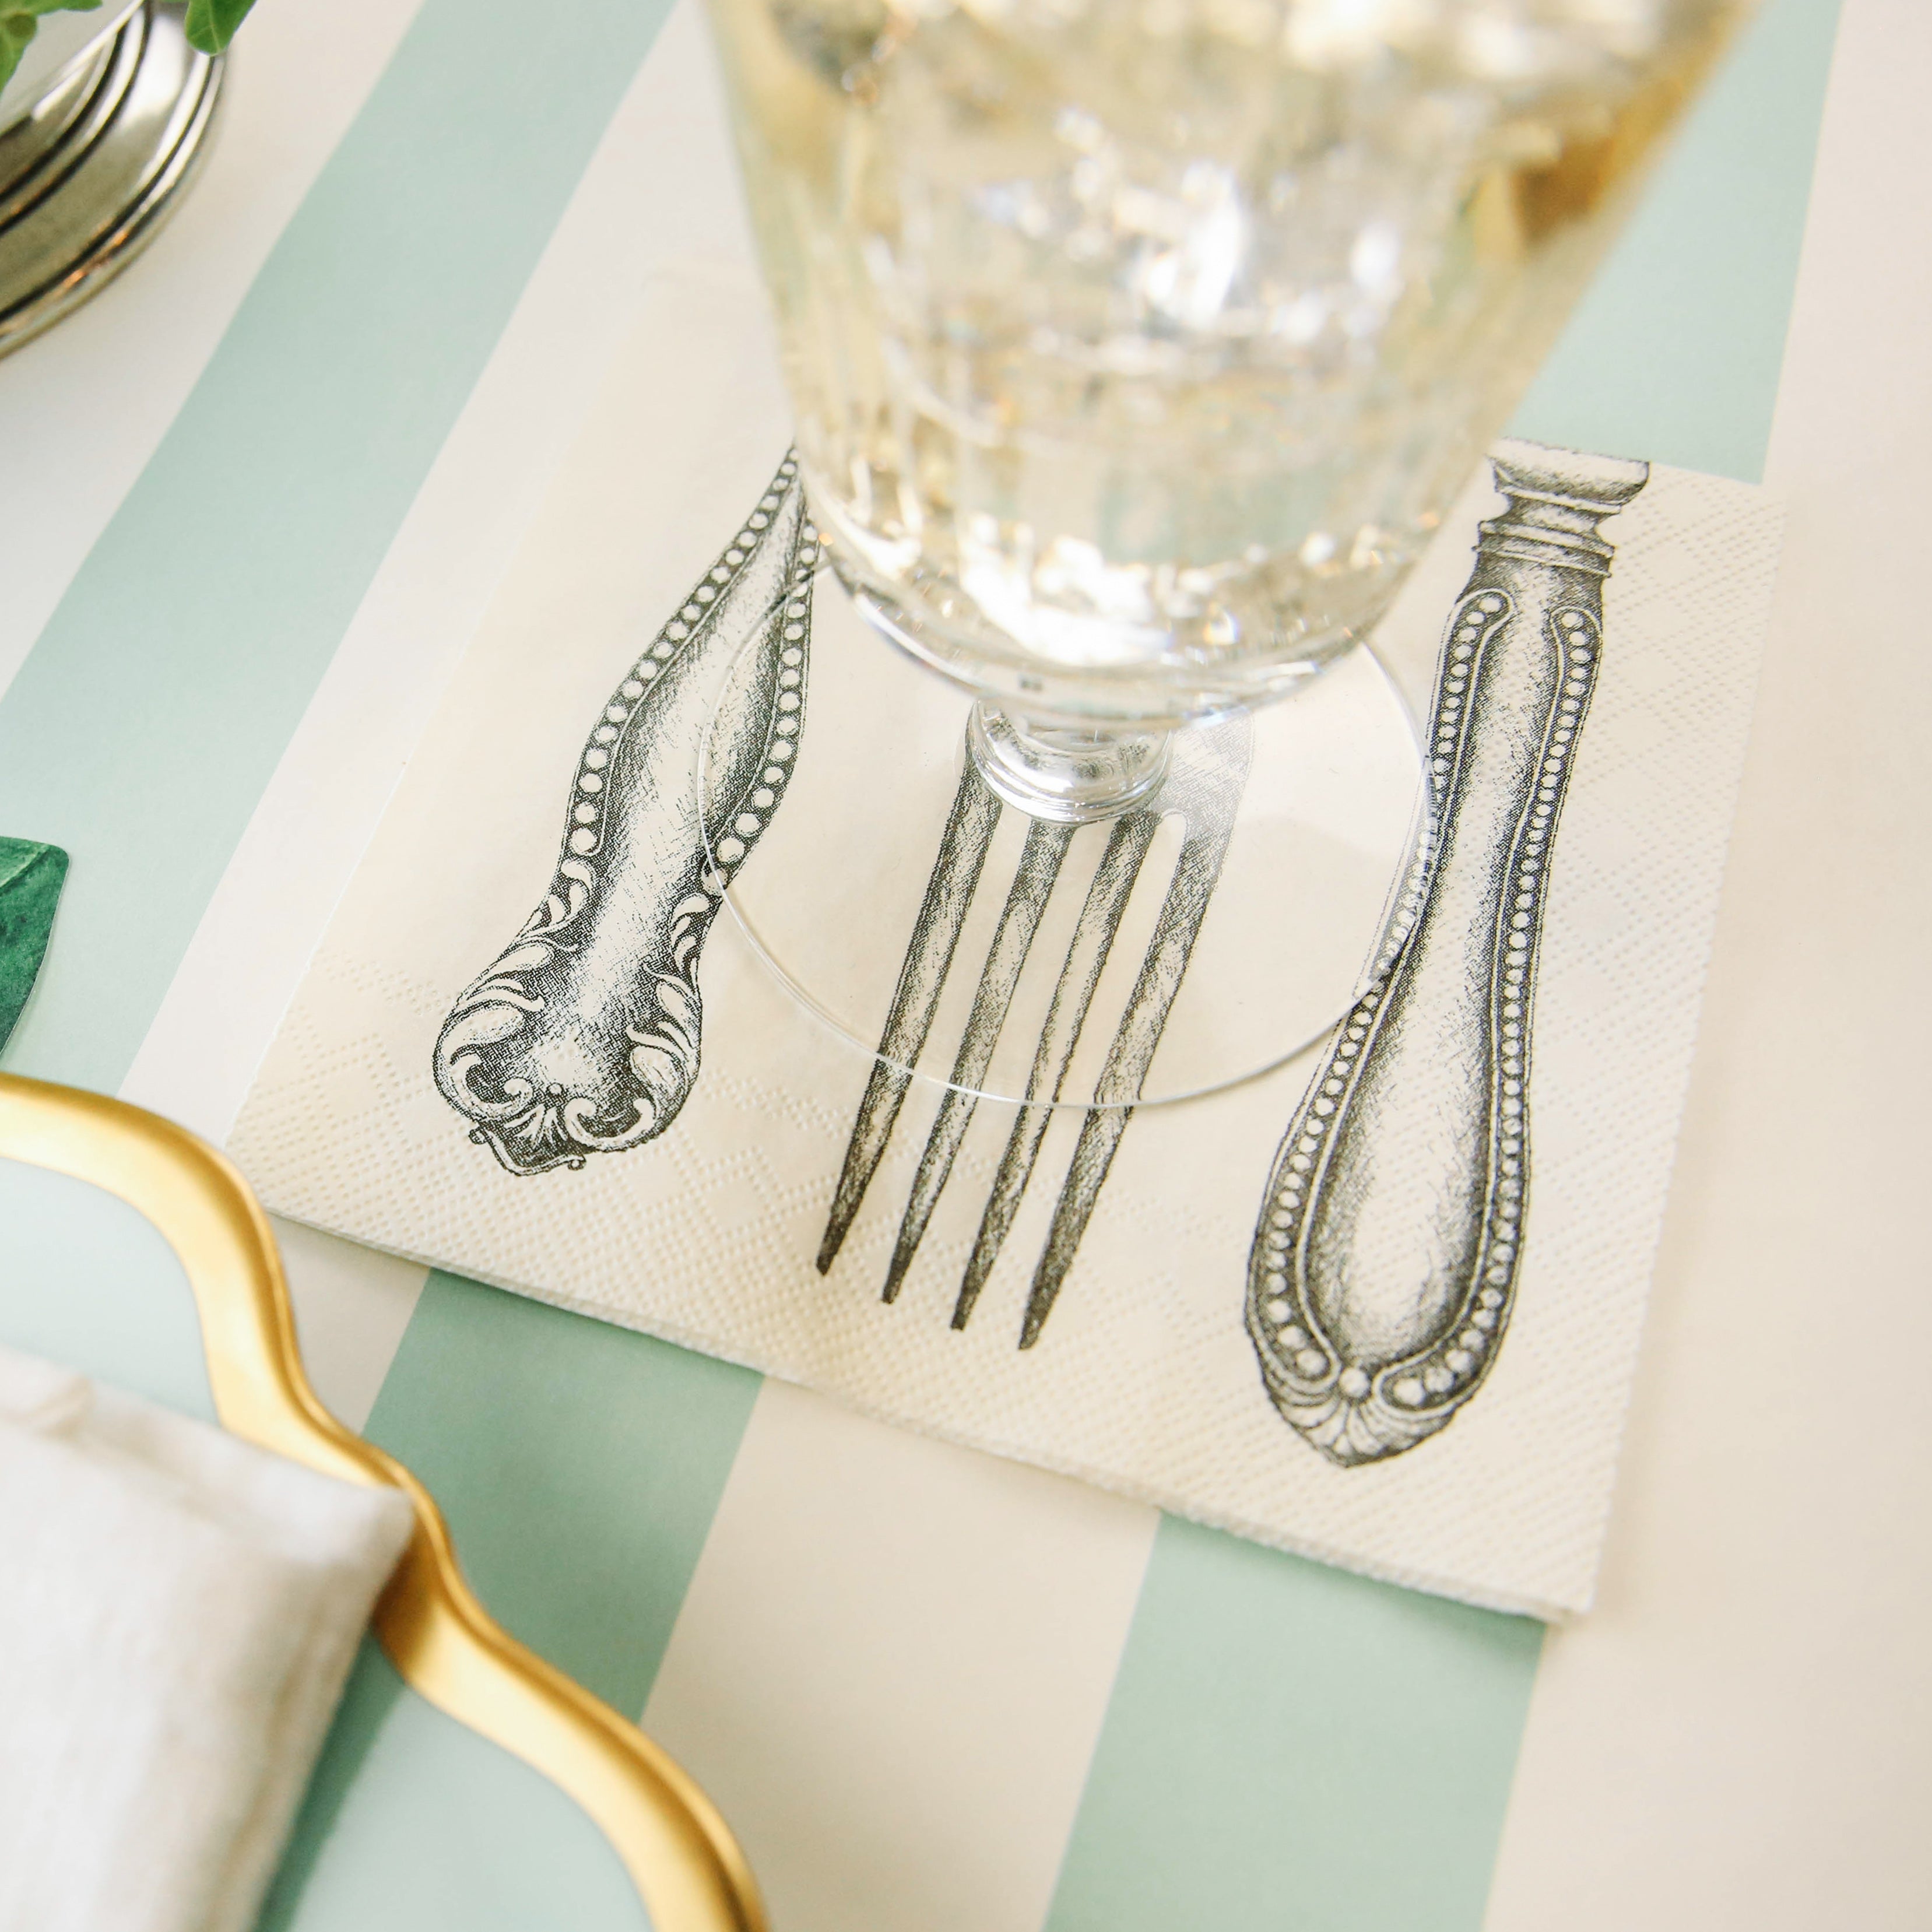 A Classic Cutlery Cocktail Napkin sitting under a full glass.